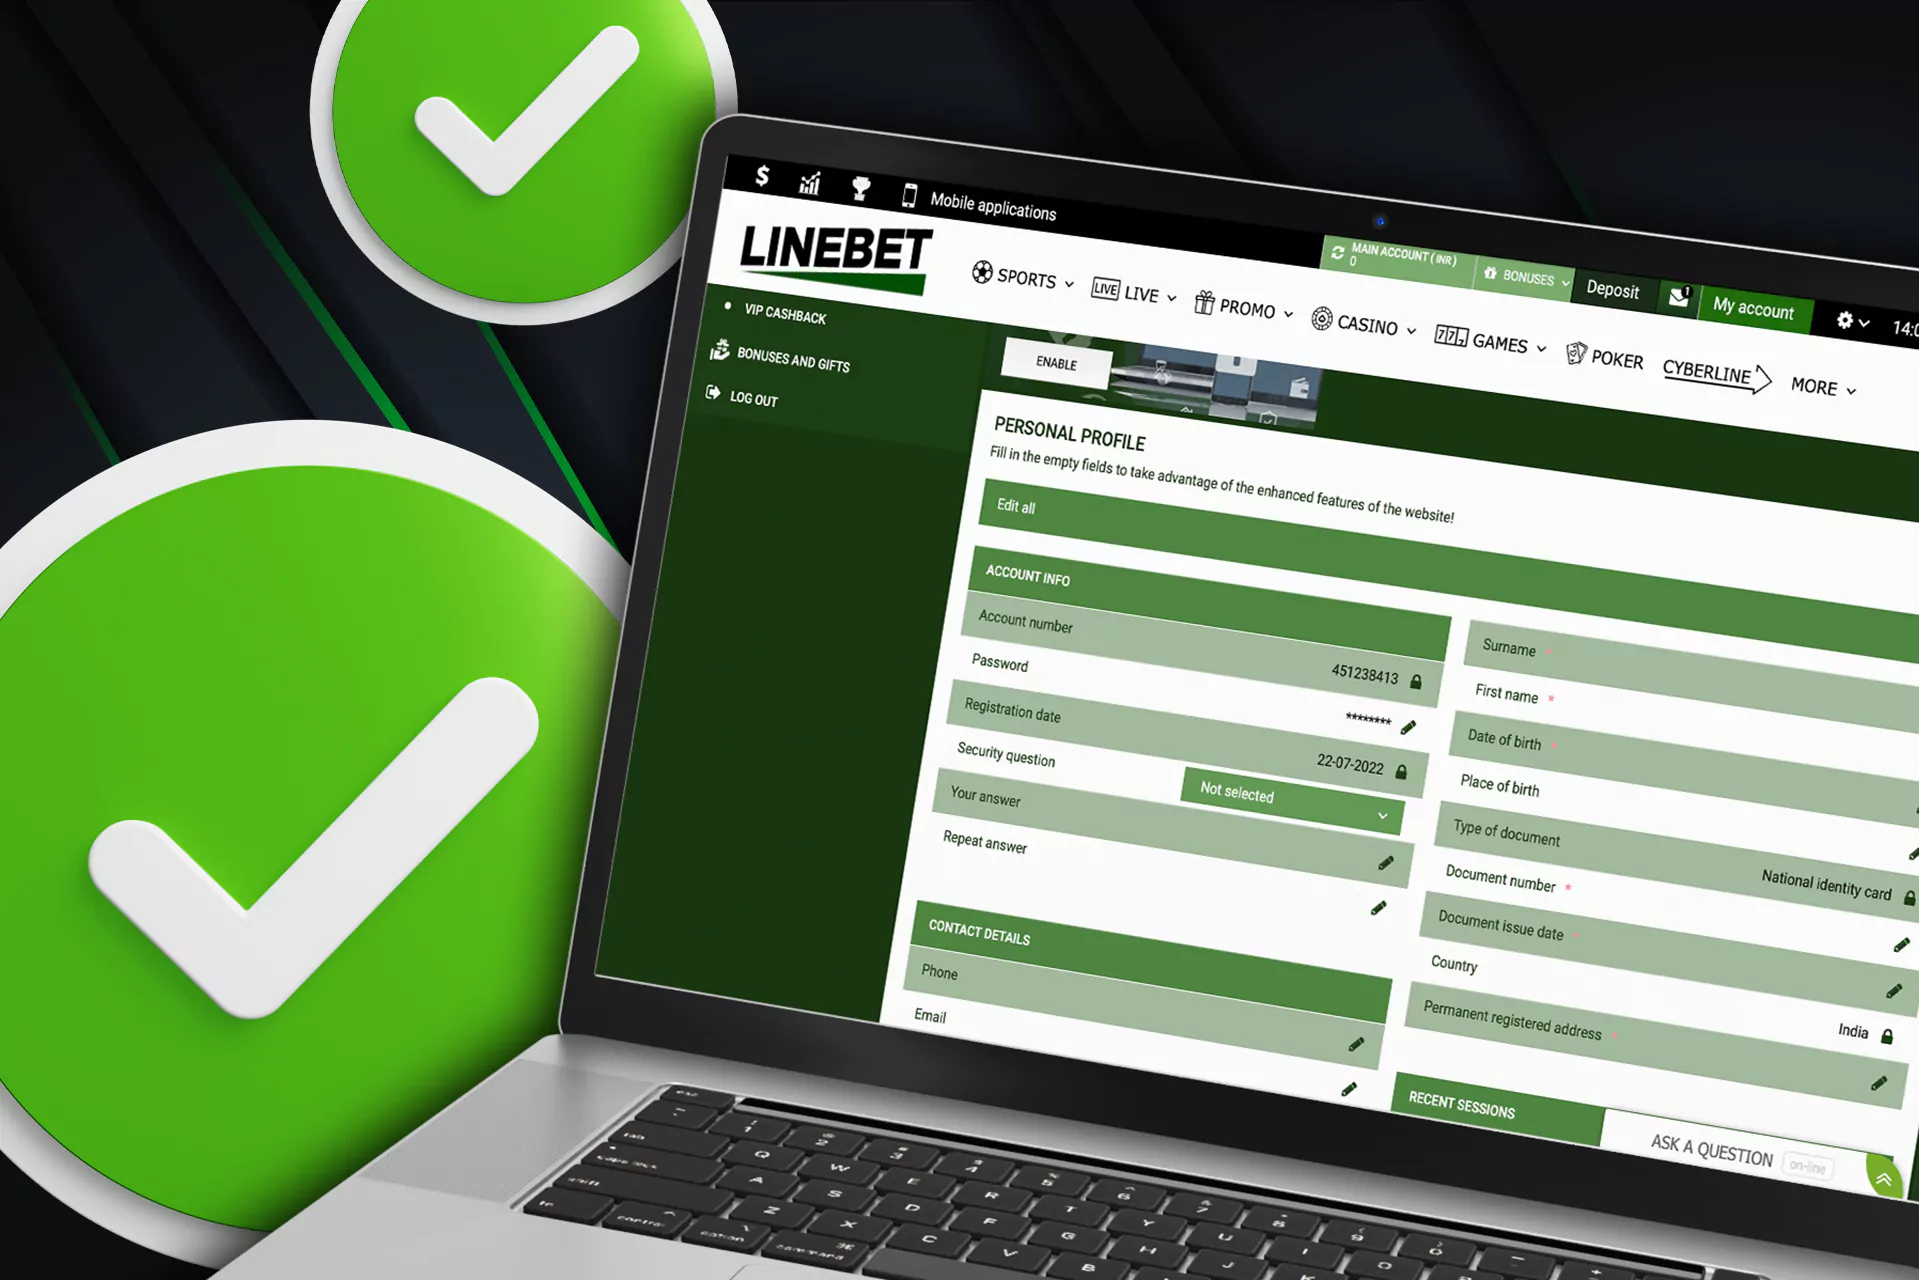 It's better to verify your account right after the Linebet registration.